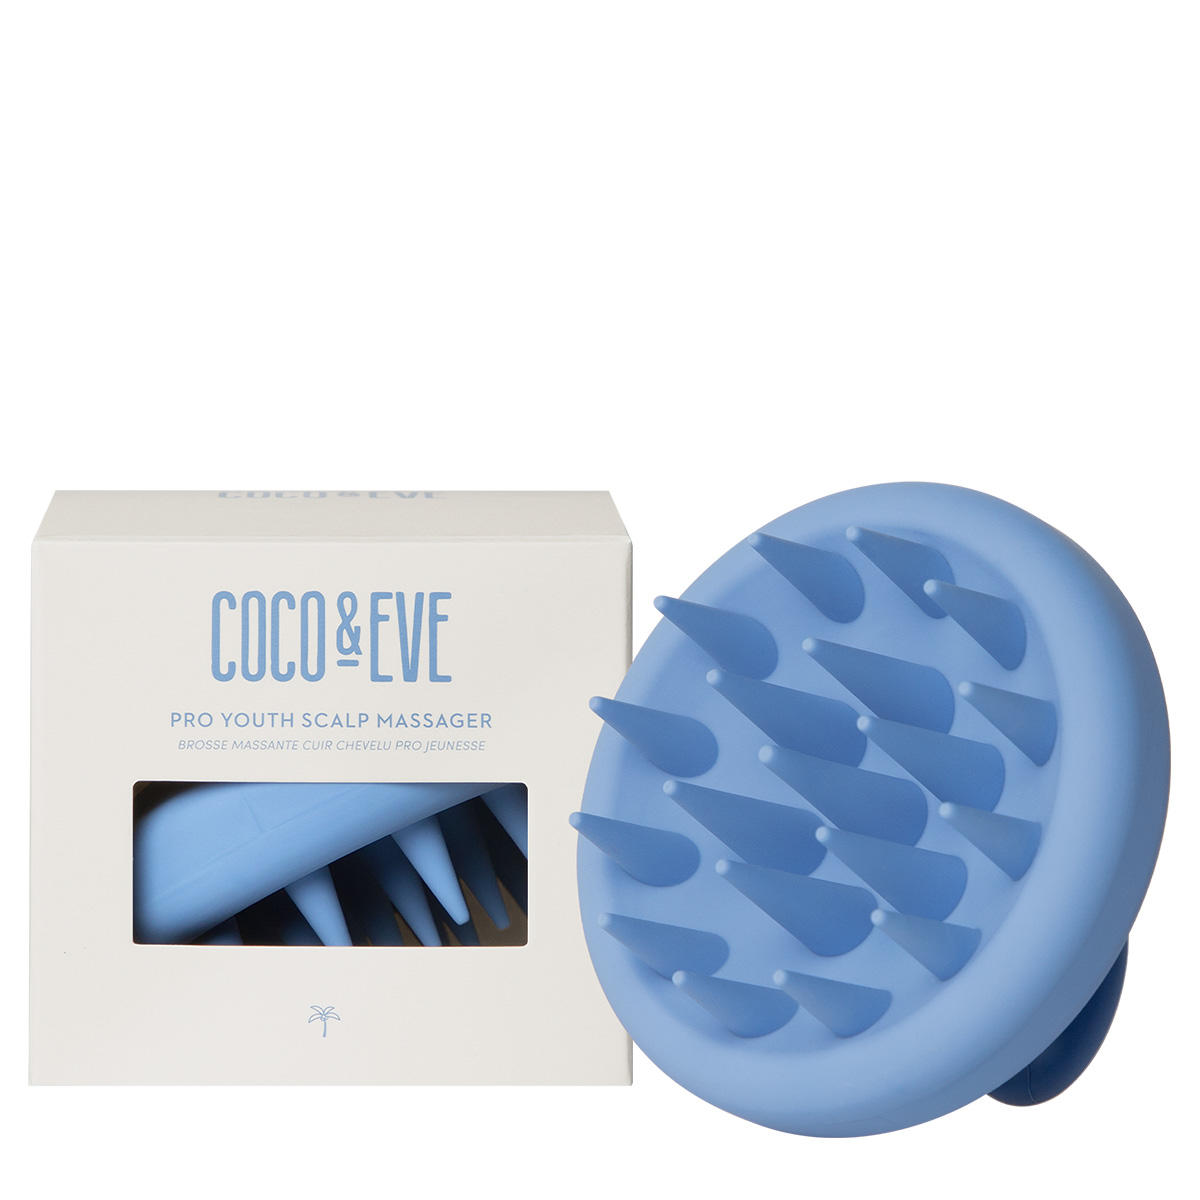 COCO & EVE Pro Youth Scalp Massager  - 2